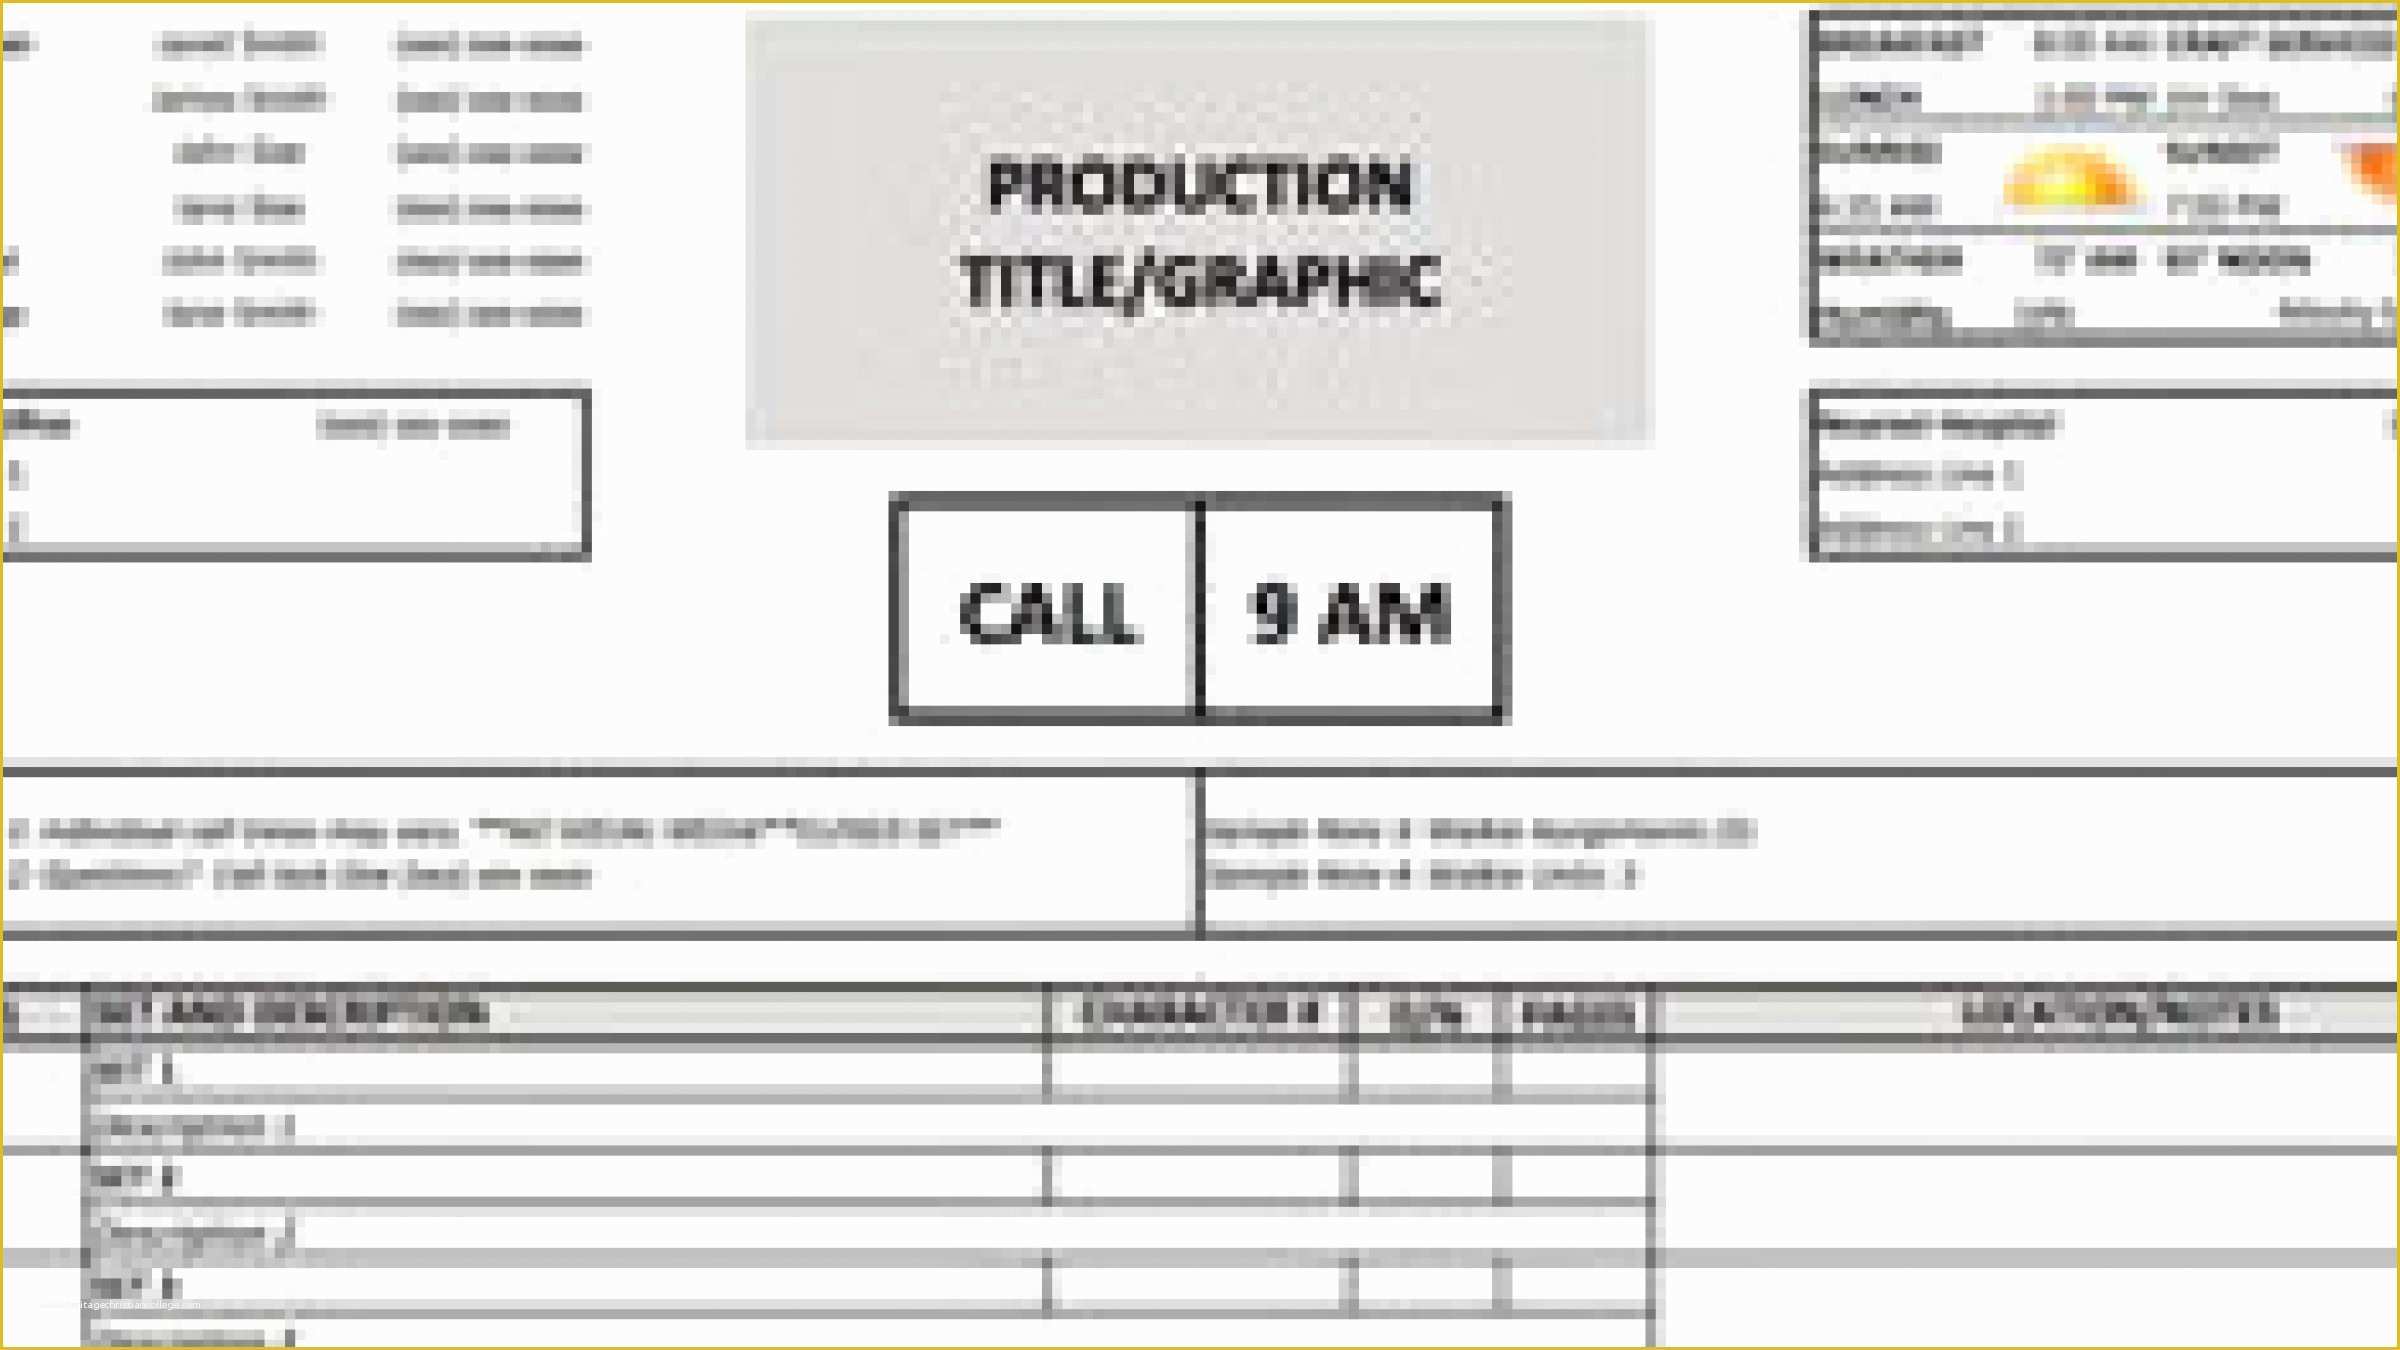 Call Sheet Template Free Of Download A Free Call Sheet Template to Get Your Crew